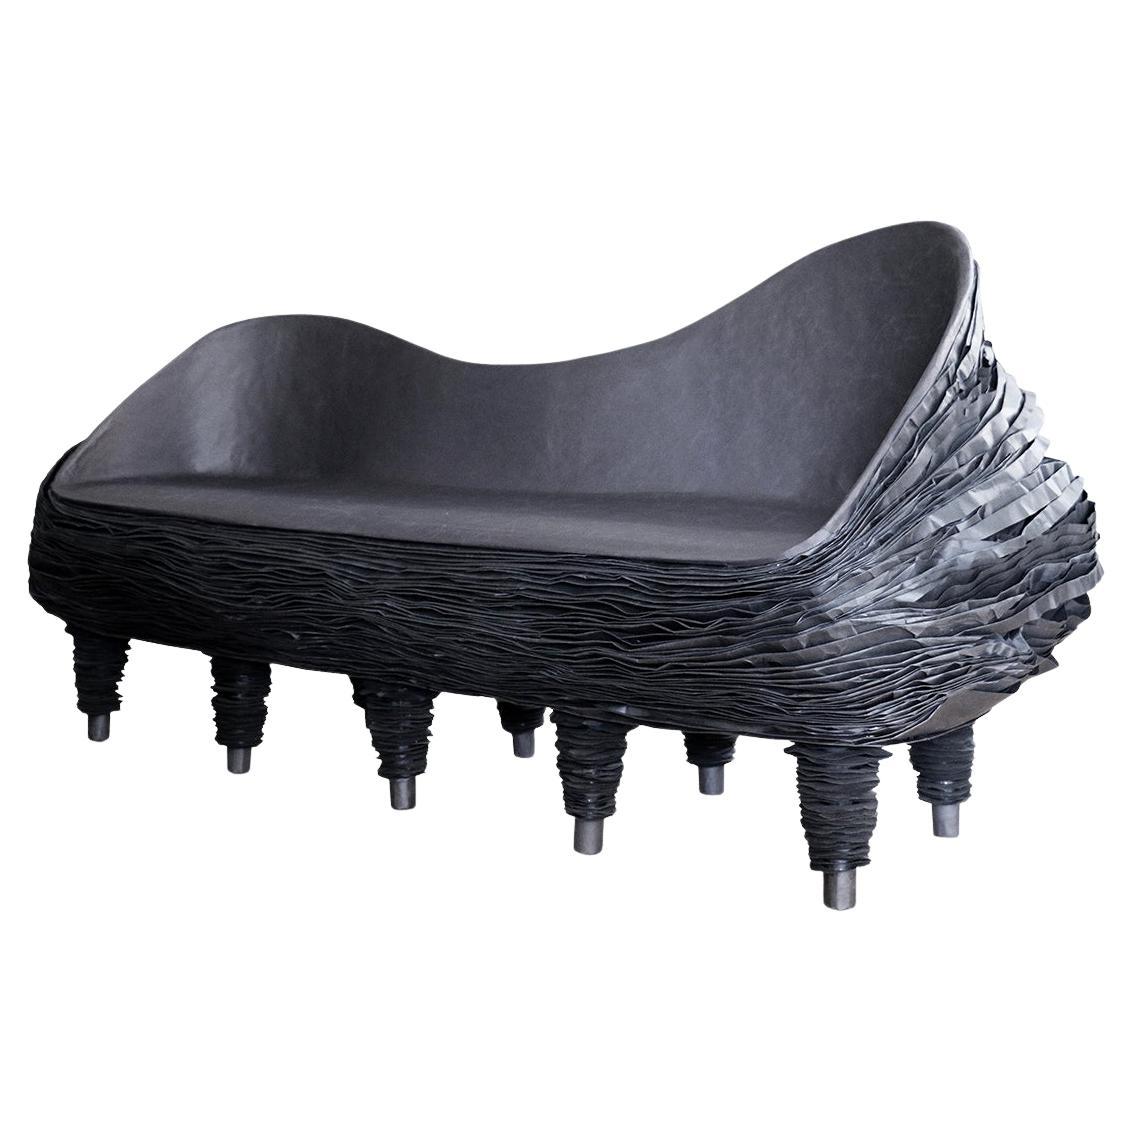 Collectible Black Paper Two-Seat Sofa Duolly by Vadim Kibardin